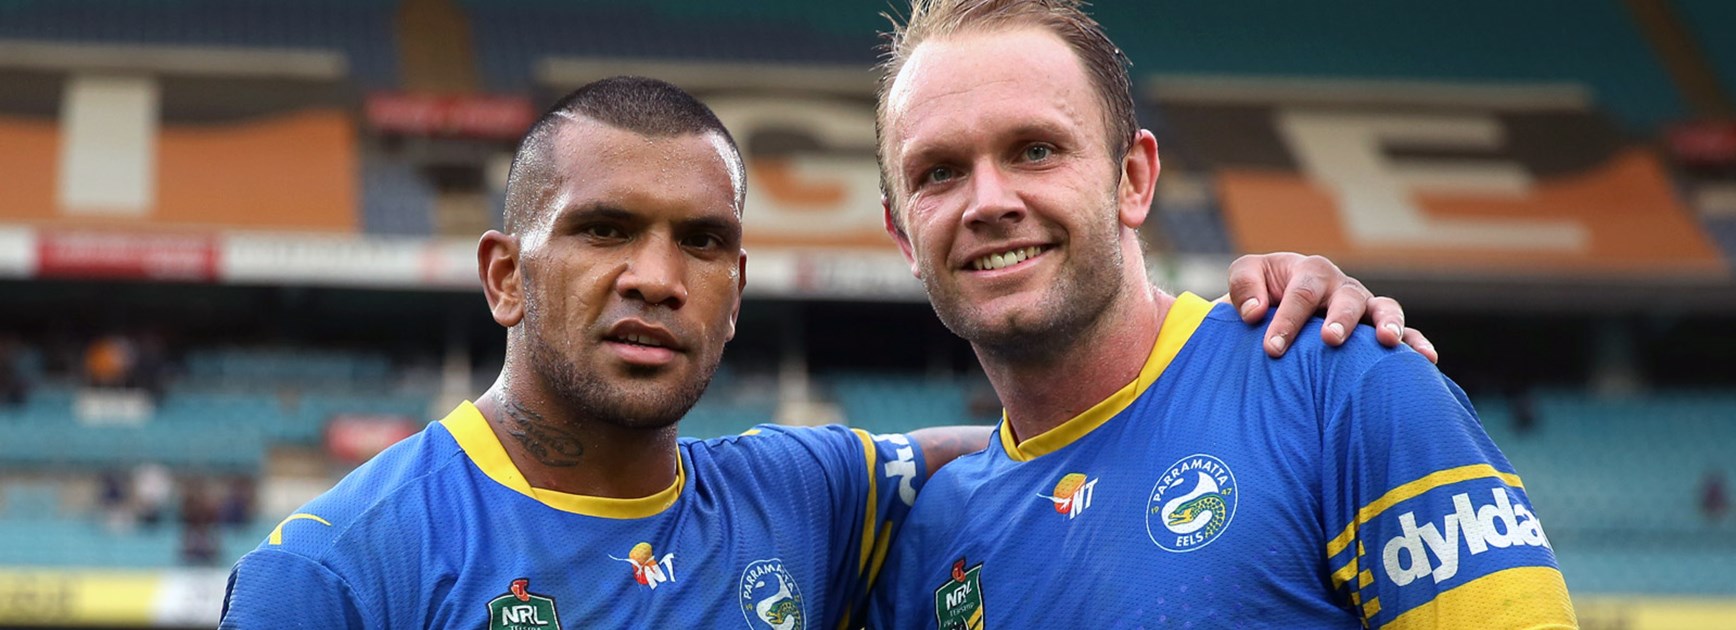 Eels forwards Manu Ma'u and David Gower will be key to their side's fortunes in the coming weeks.